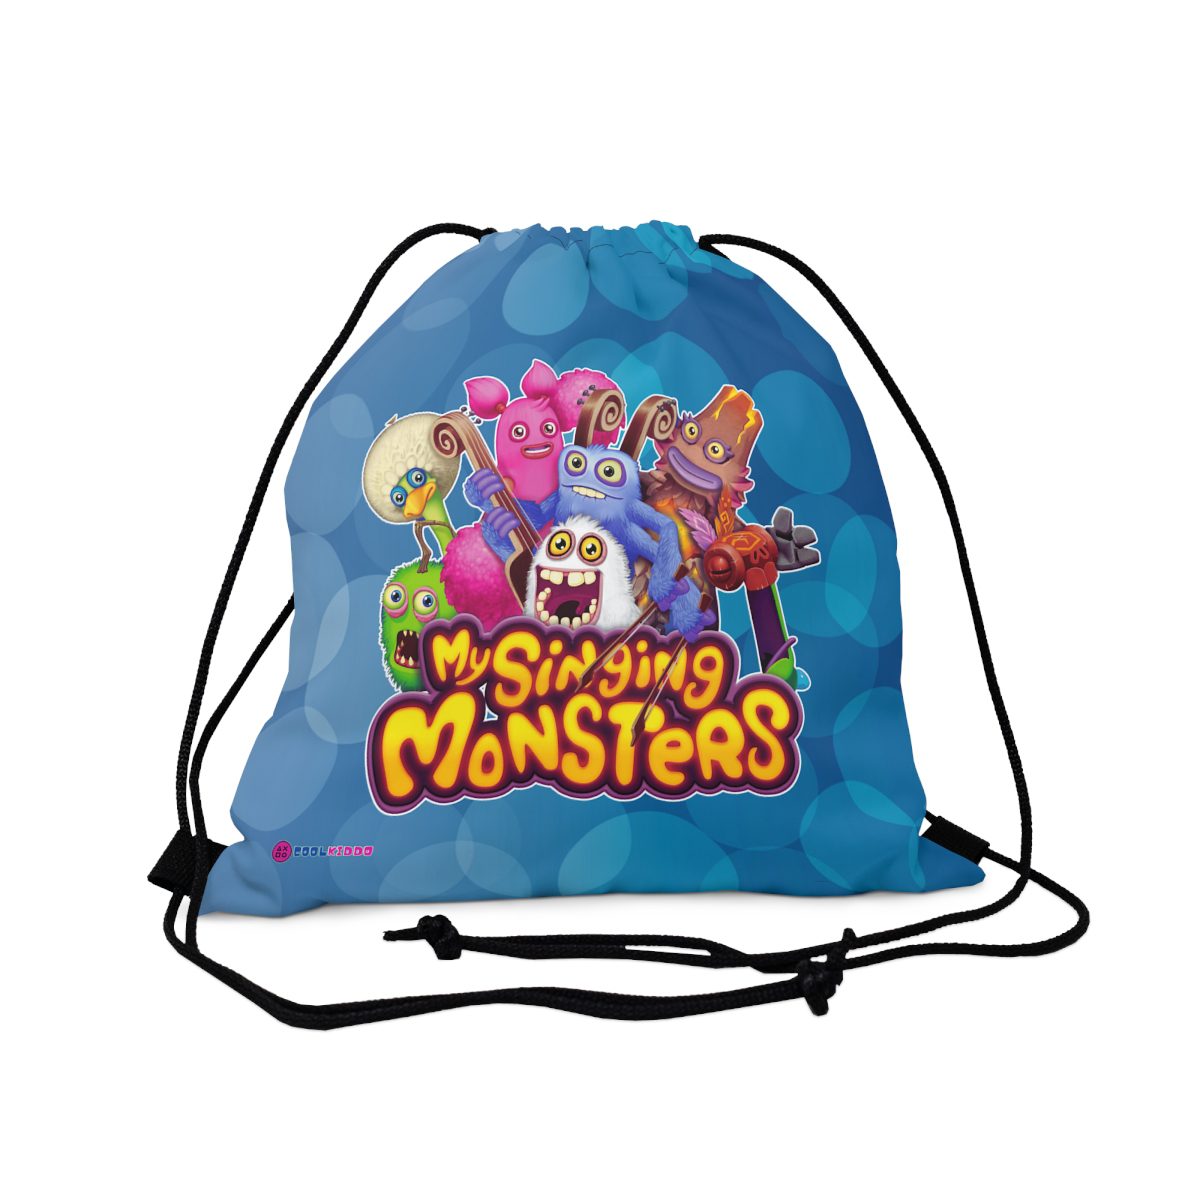 My Singing Monsters Adventure Drawstring Bag: Perfect for Outdoor Fun! Cool Kiddo 10